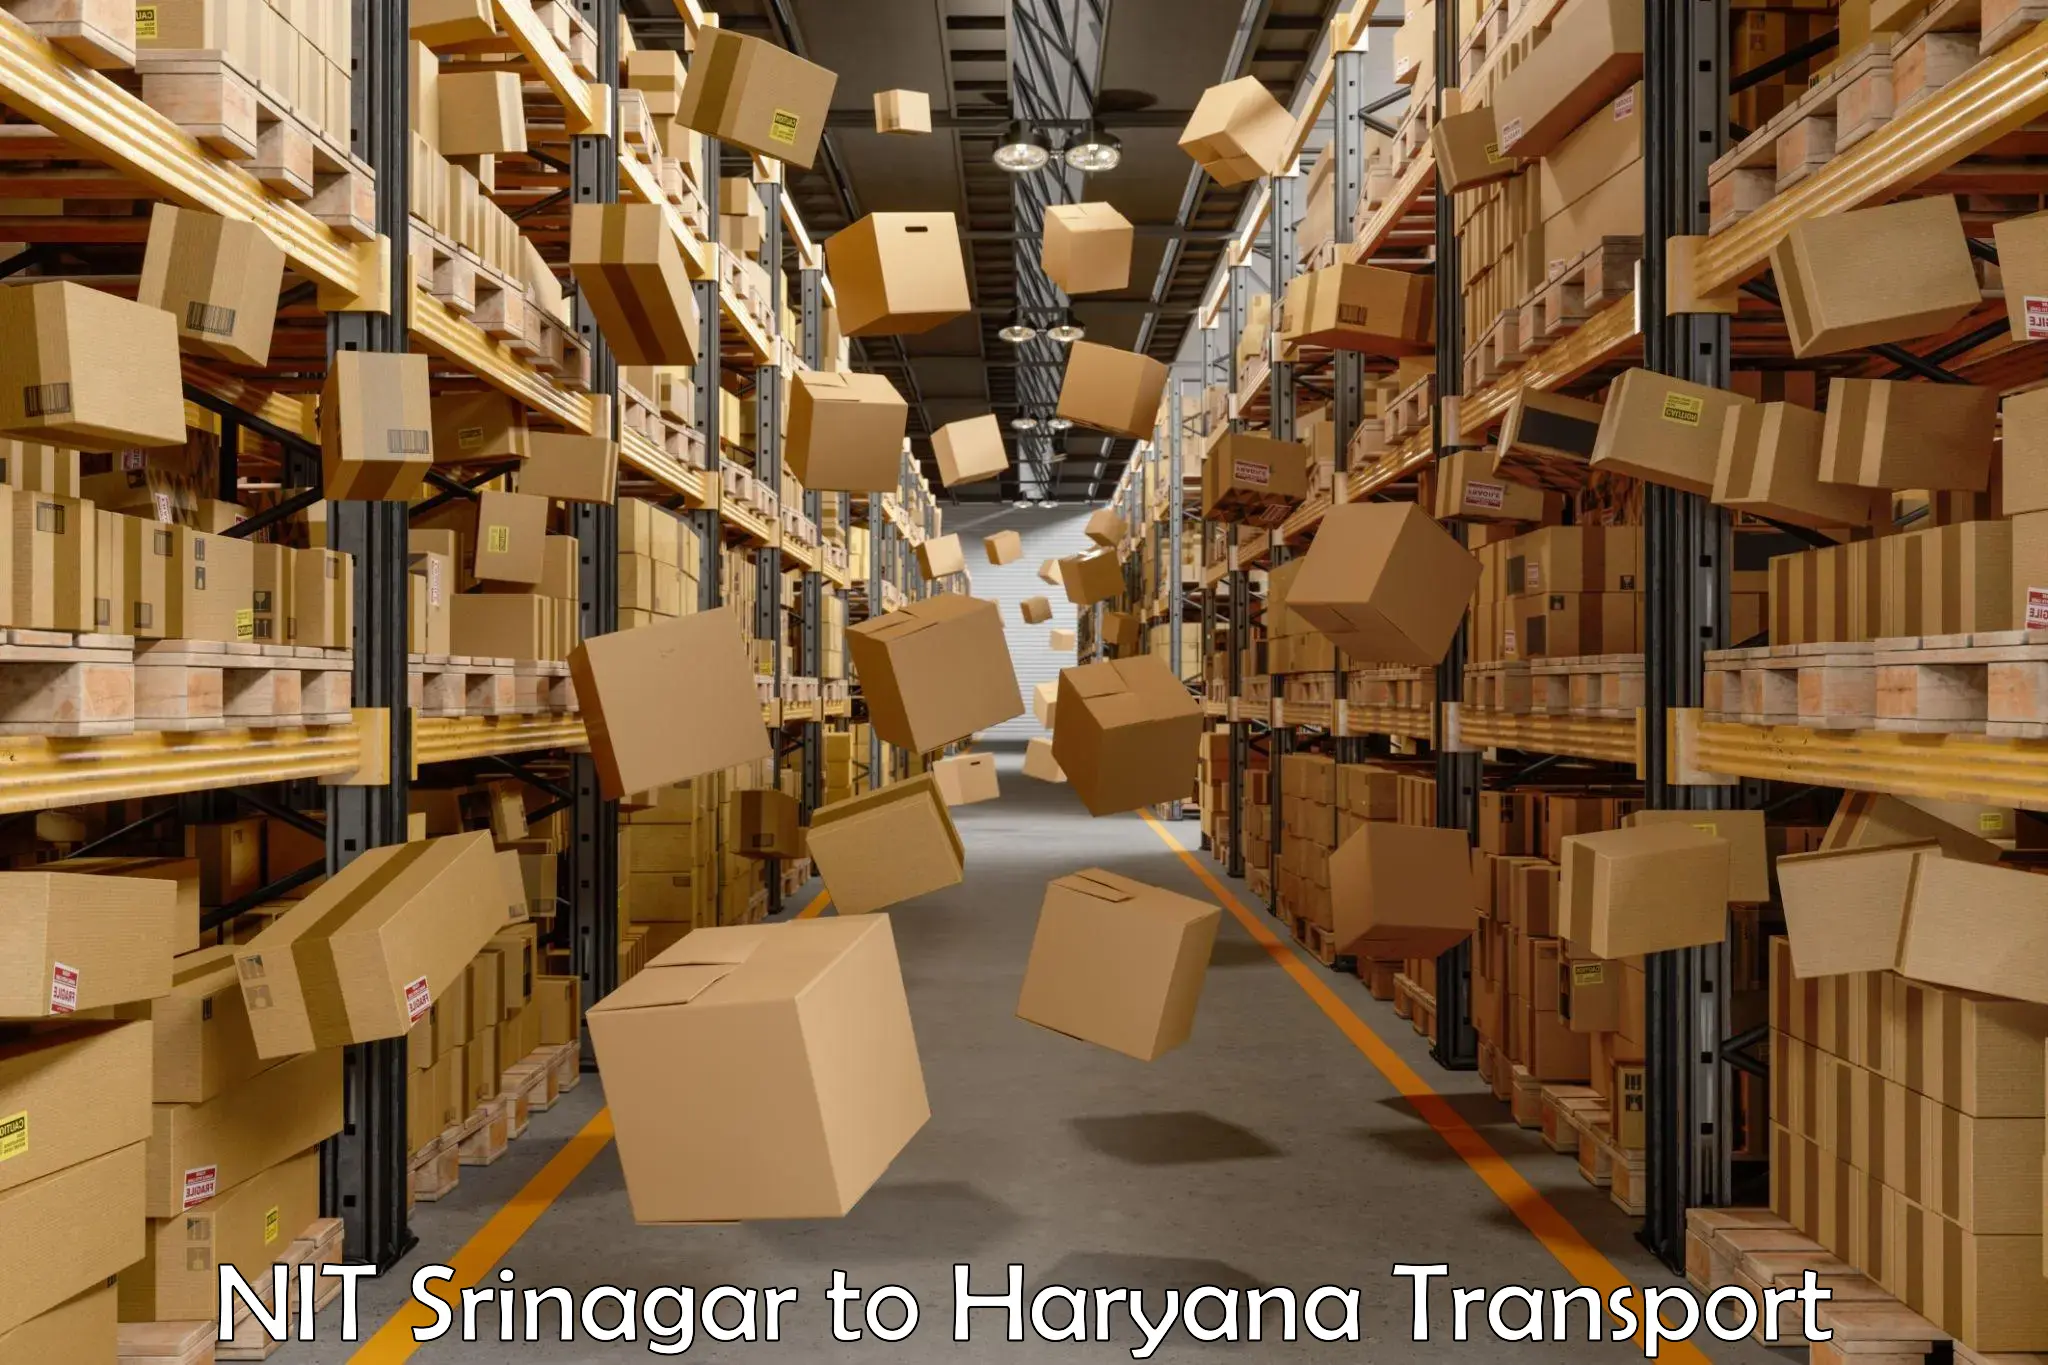 Transport shared services in NIT Srinagar to NCR Haryana